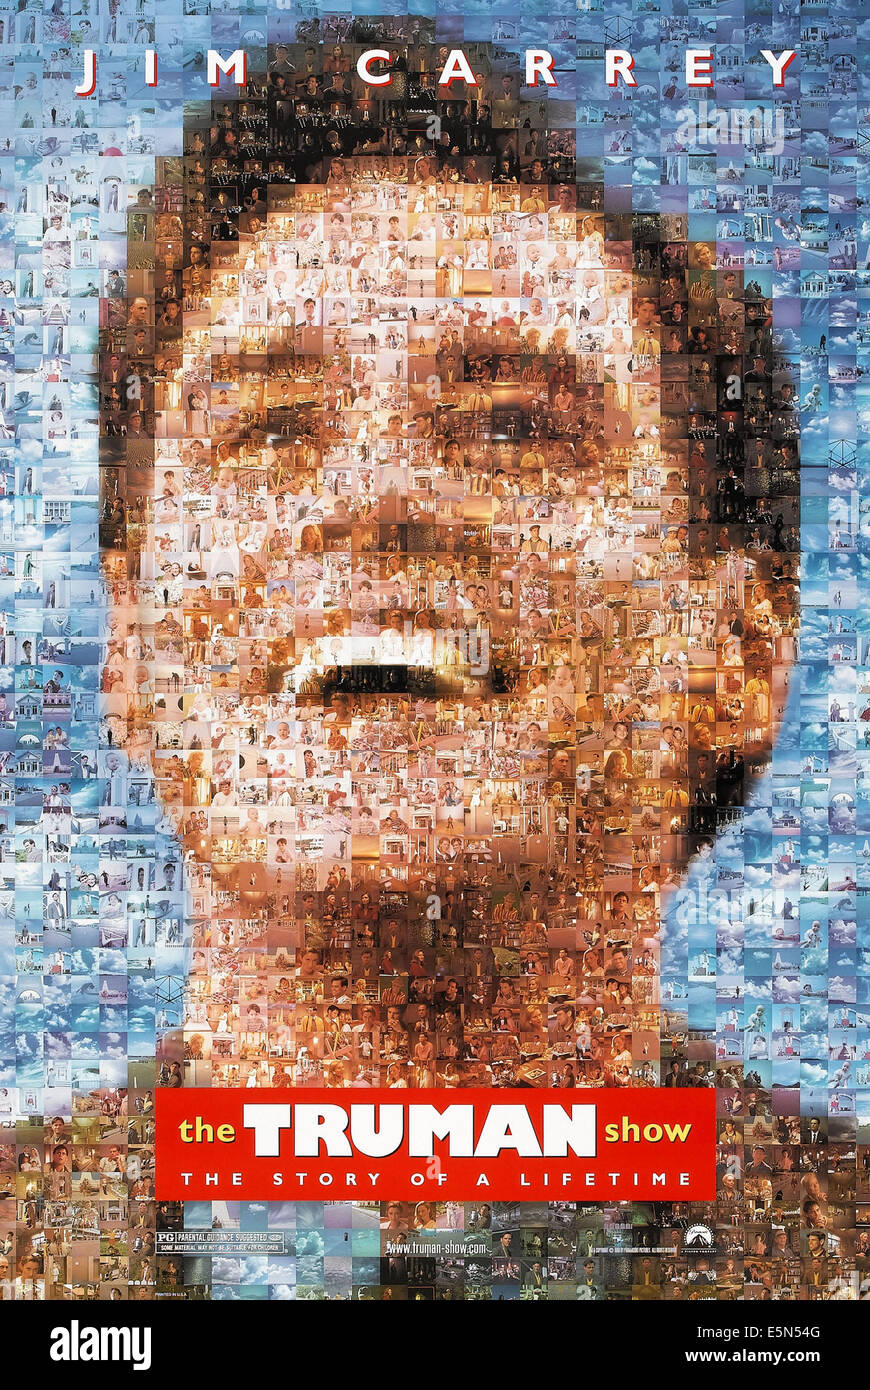 THE TRUMAN SHOW, US poster art, Jim Carrey, 1998, ©Paramount Pictures/courtesy Everett Collection Stock Photo